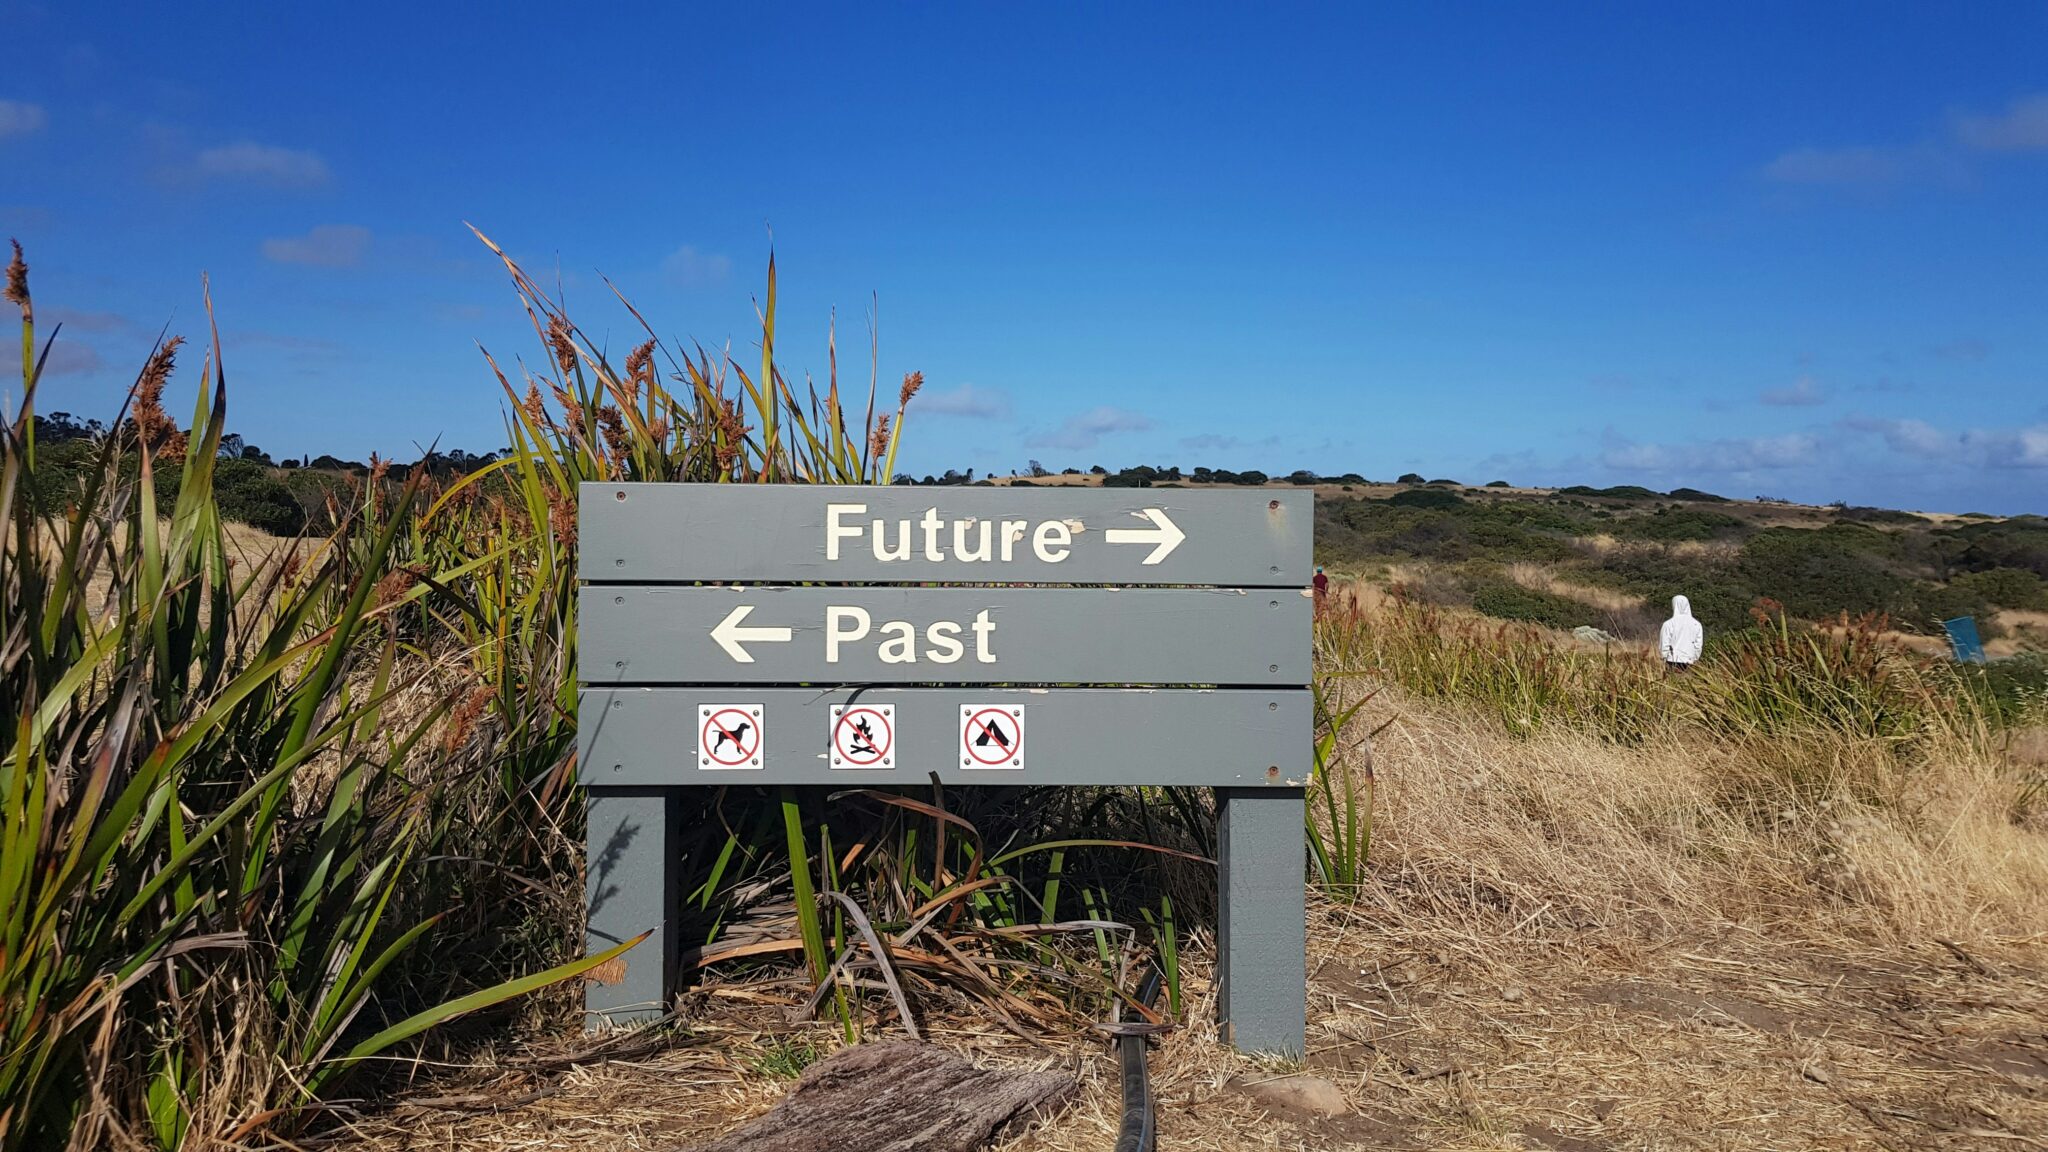 wooden signs with "future" and "past" words with arrows